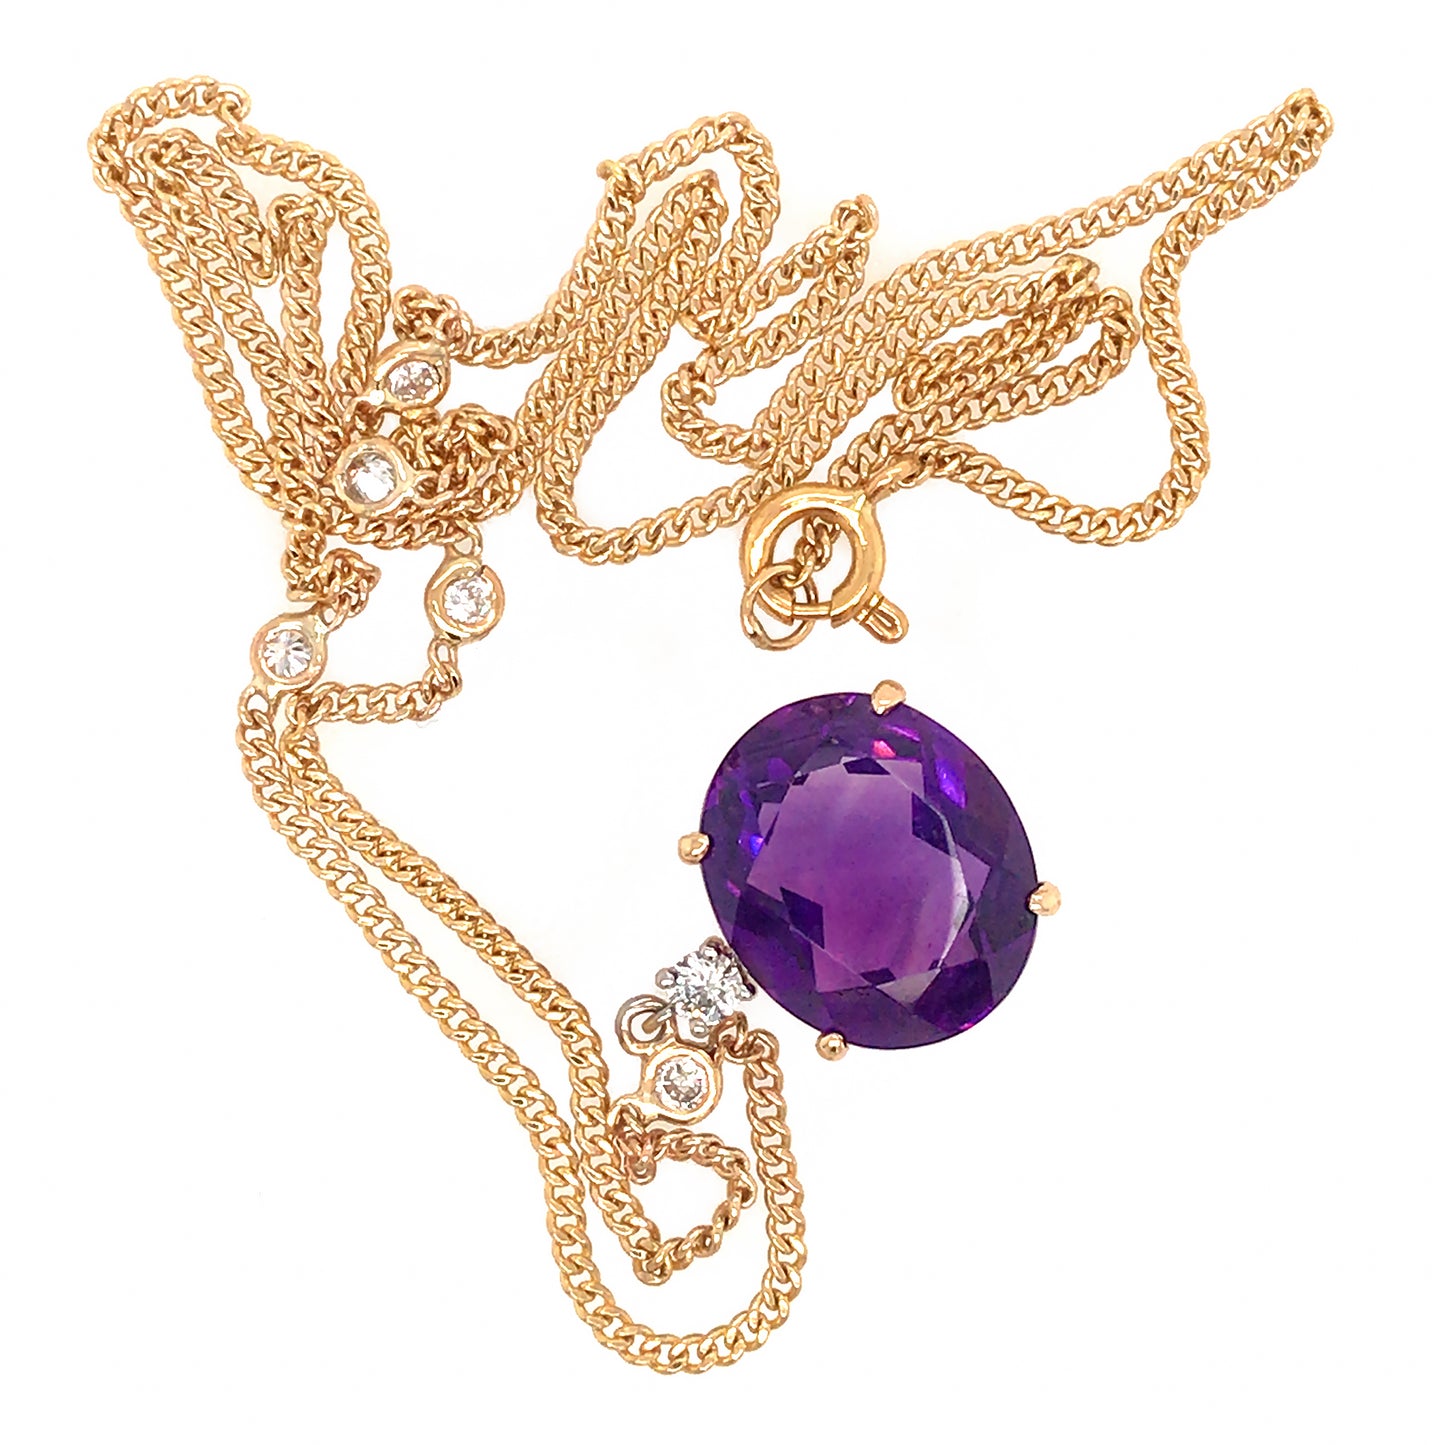 Lovely 14k Yellow Gold Amethyst Pendant with Diamond By the Yard Necklace